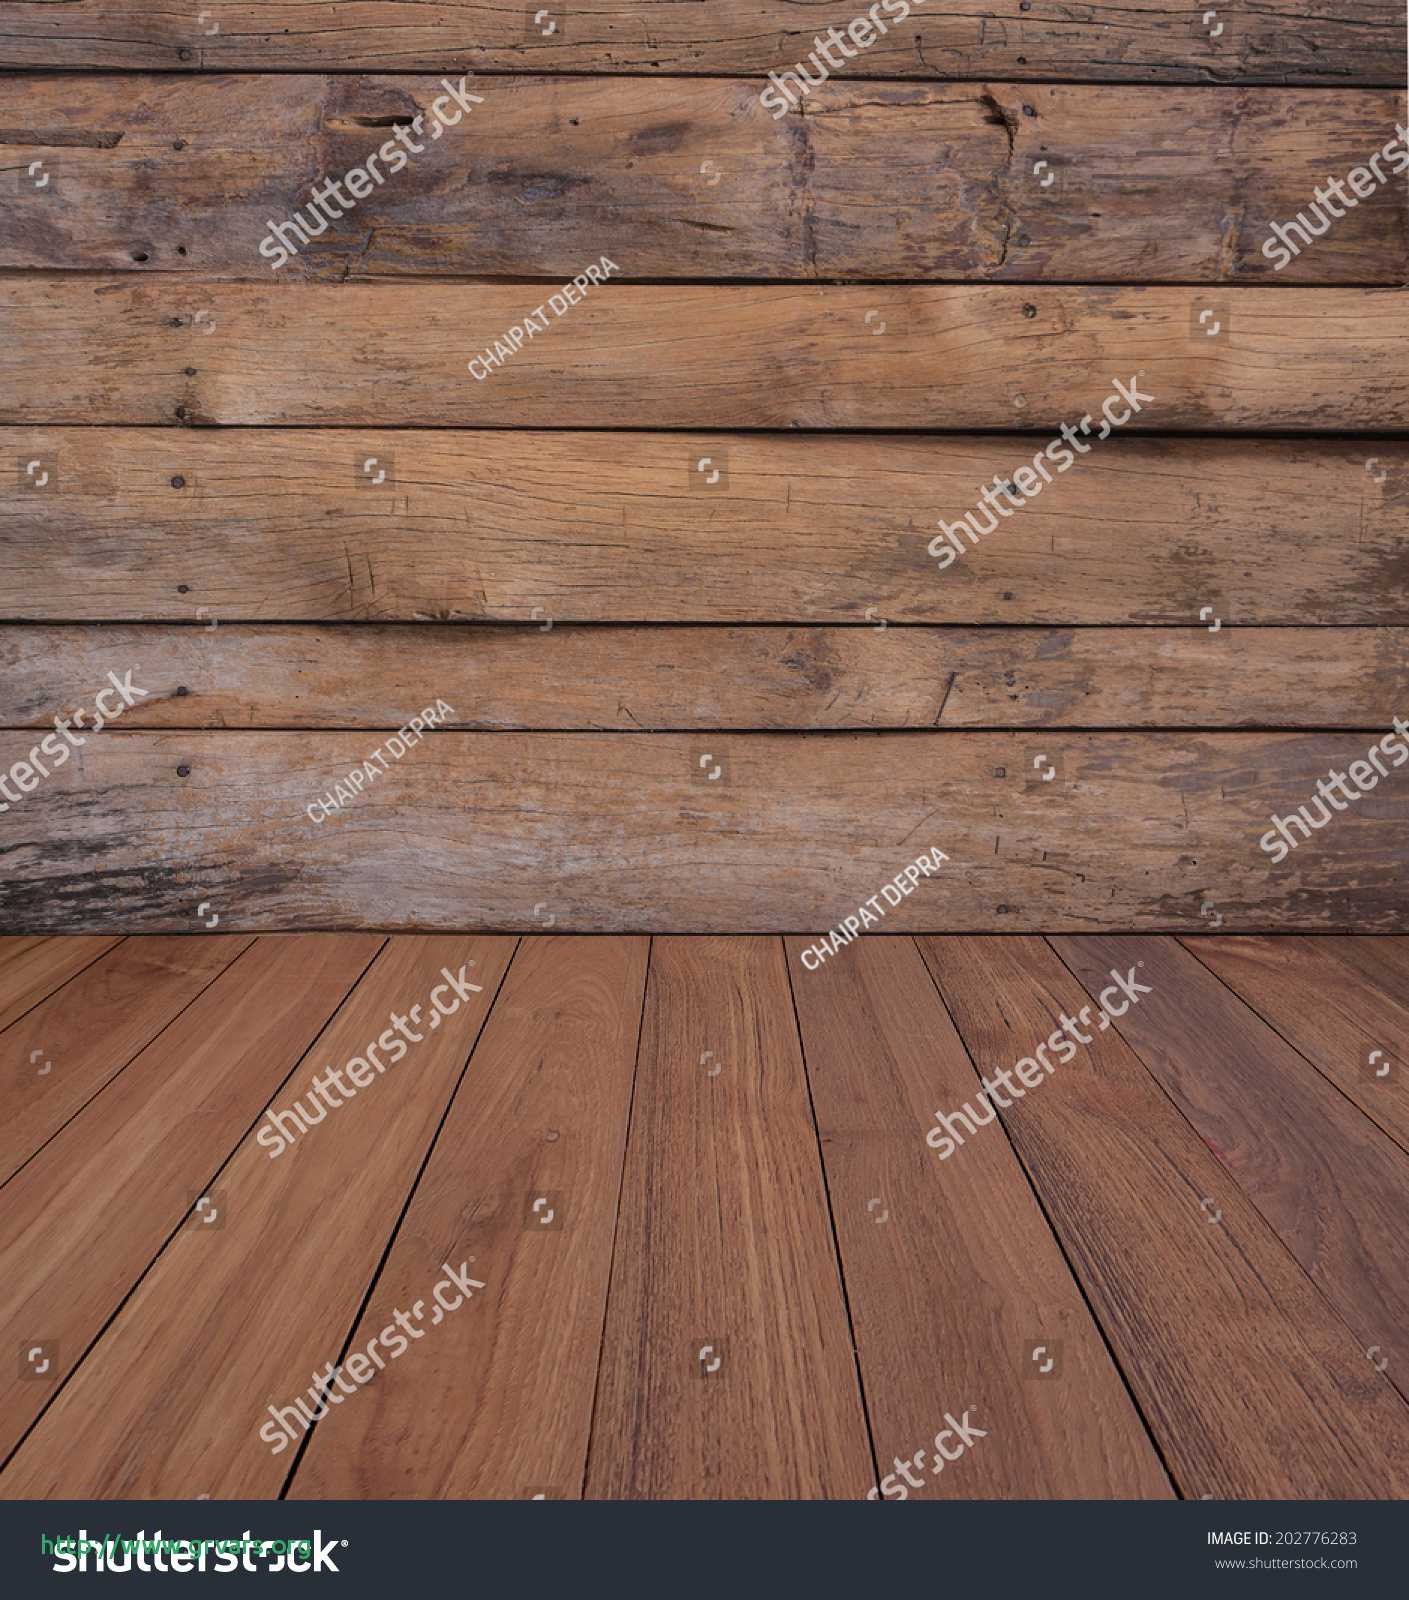 29 Lovely Hardwood Floor Repair Gaps In the Planks 2024 free download hardwood floor repair gaps in the planks of 18 beau what type of hardwood floor do i have ideas blog with regard to od wood wall and wood floor